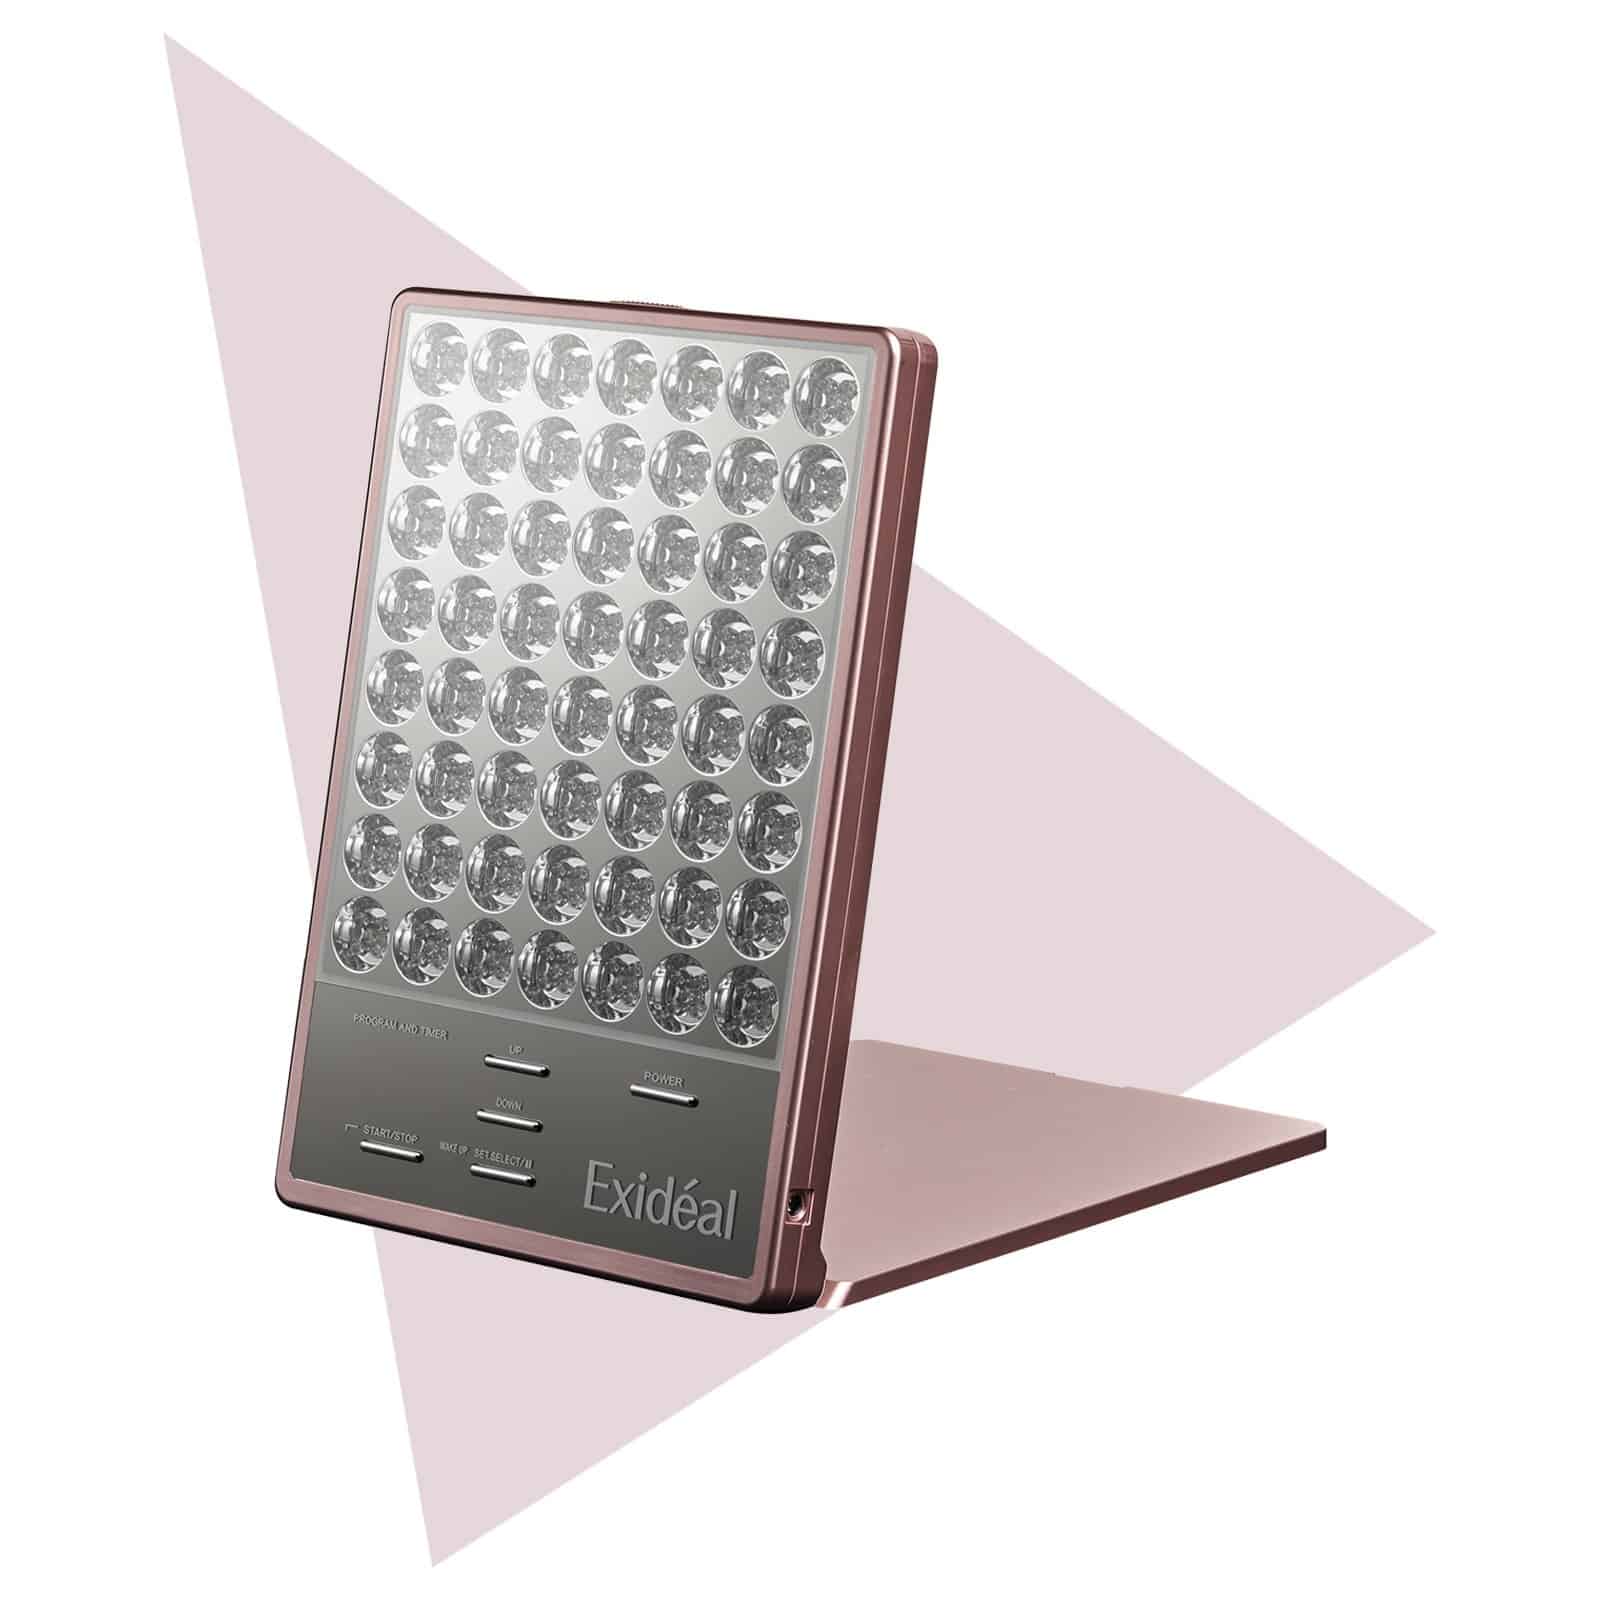 Exideal LED Beauty Therapy EX280 – The Artistry